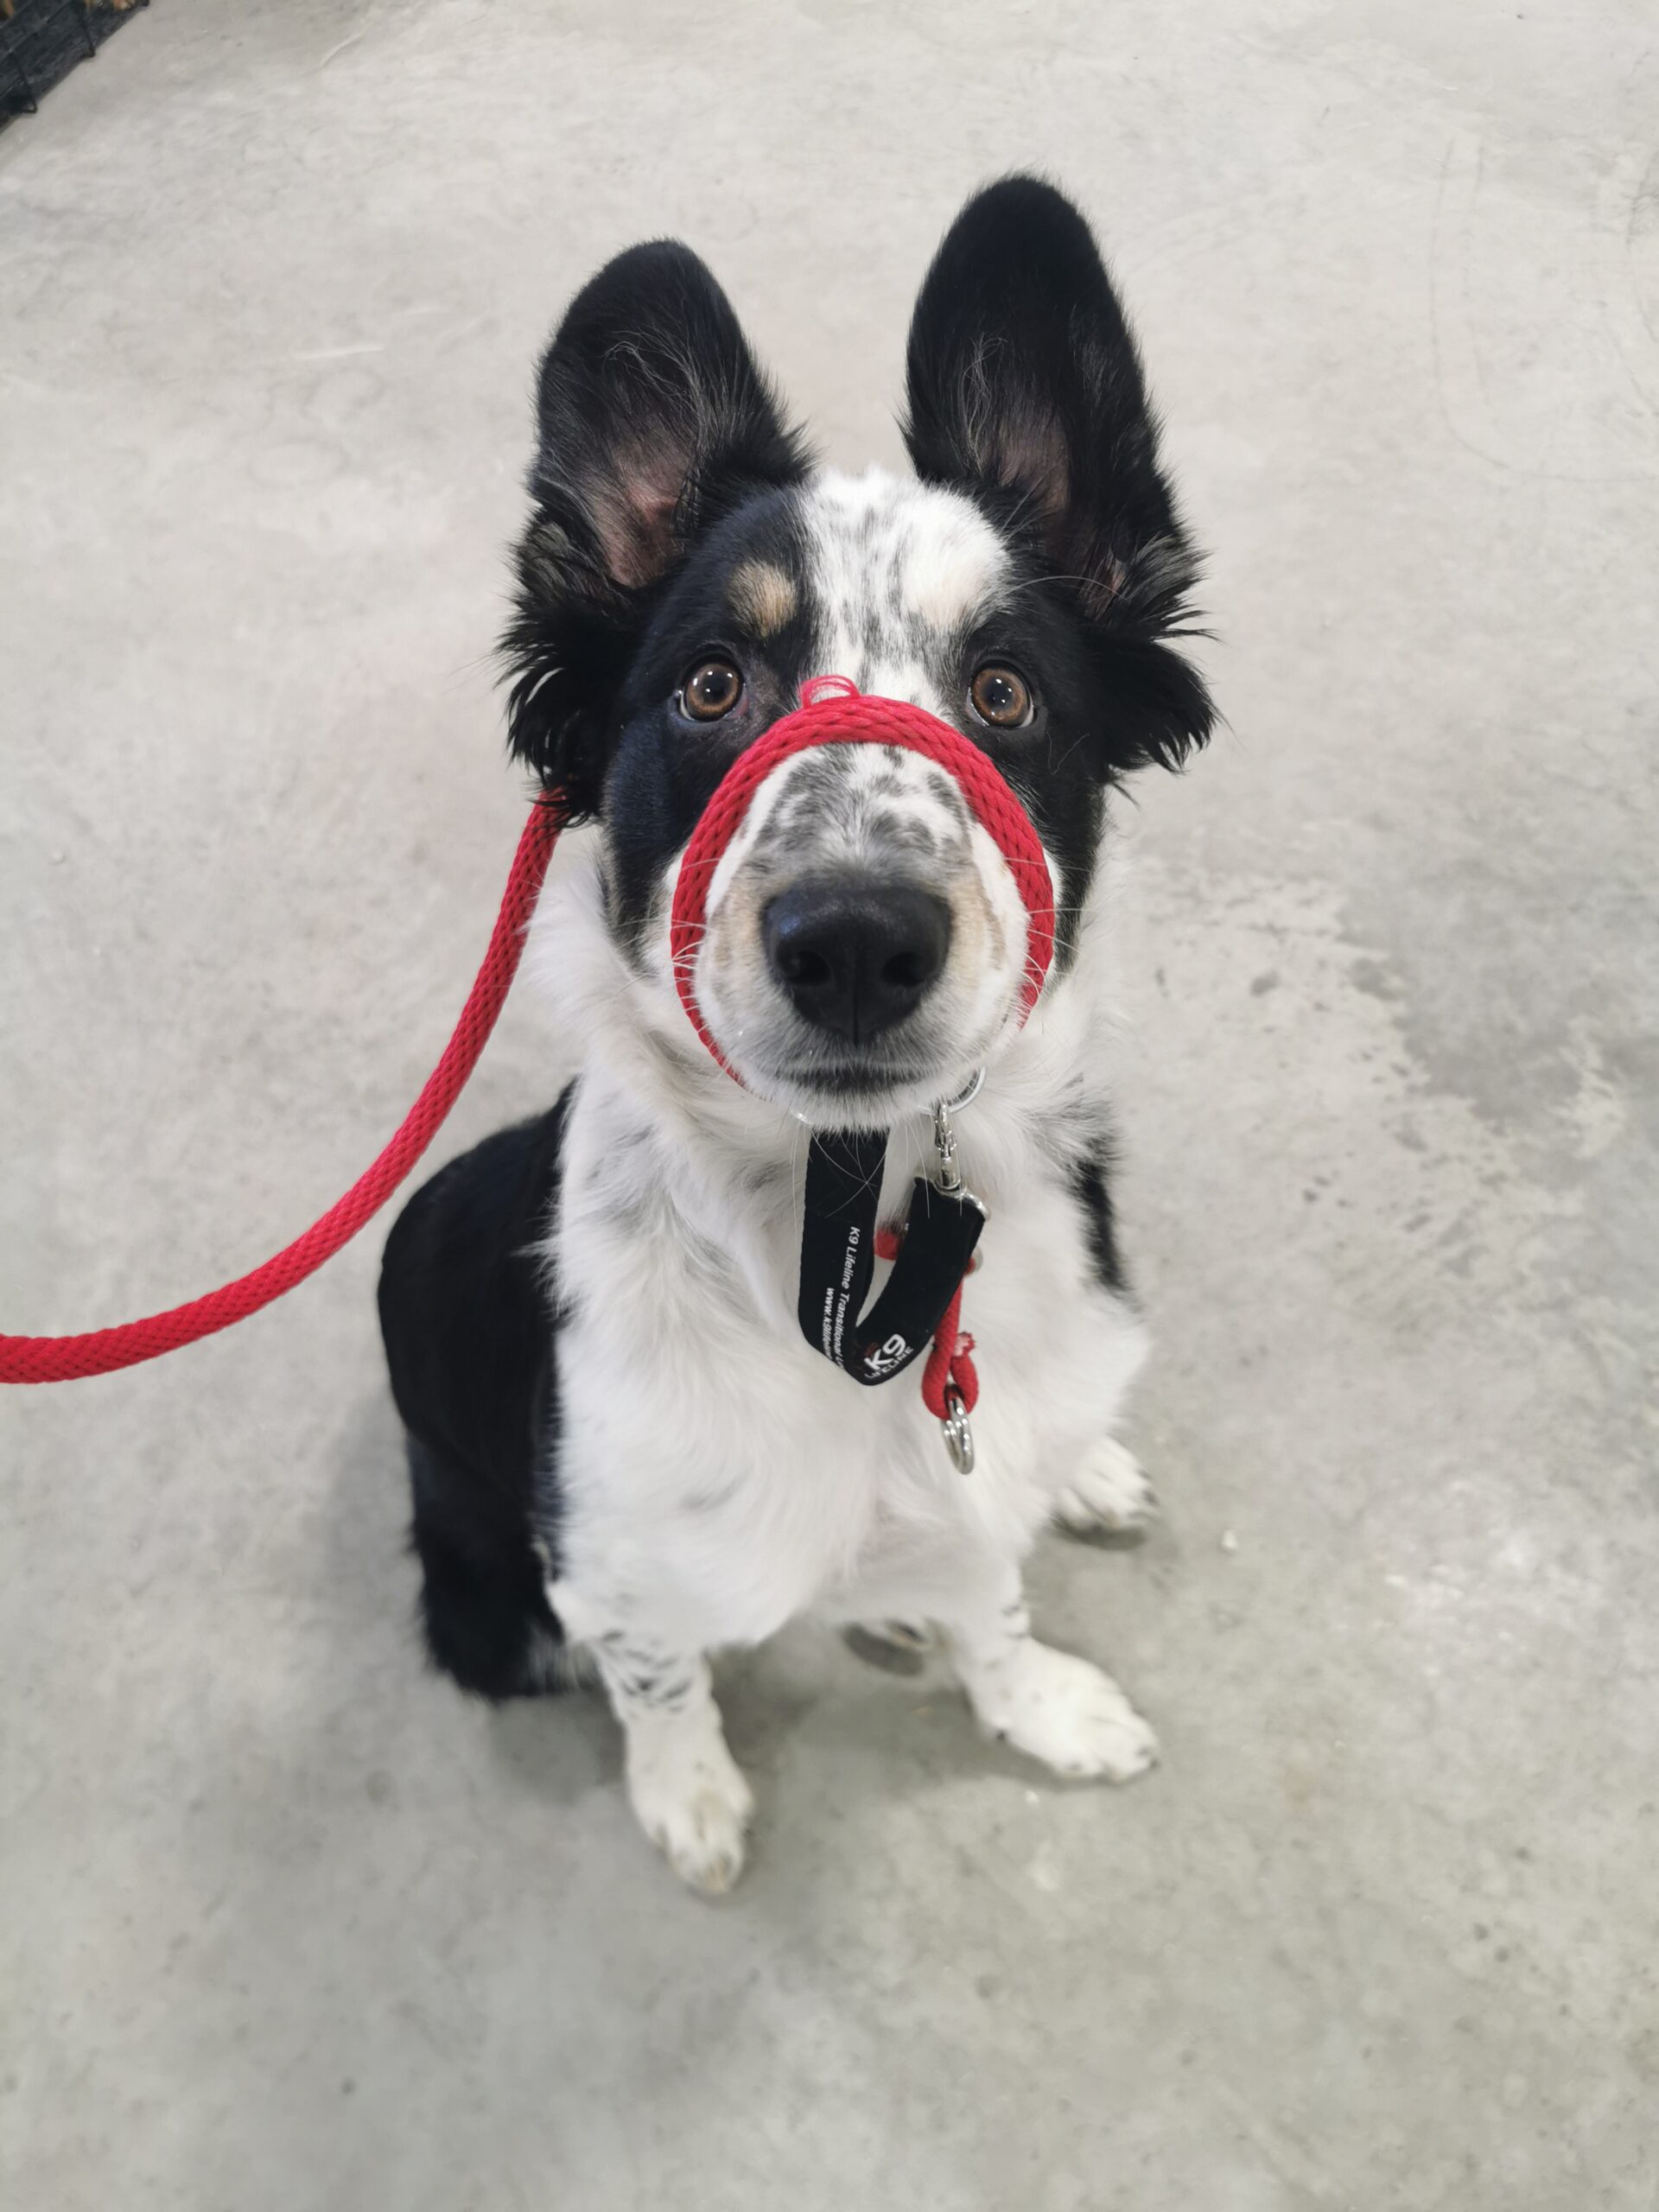 Black and white dog wearing a red K9 Lifeline Transitional LeashHuman holding a golden dog with a blue K9 lifeline transitional leash | Prairieburn K9 Academy